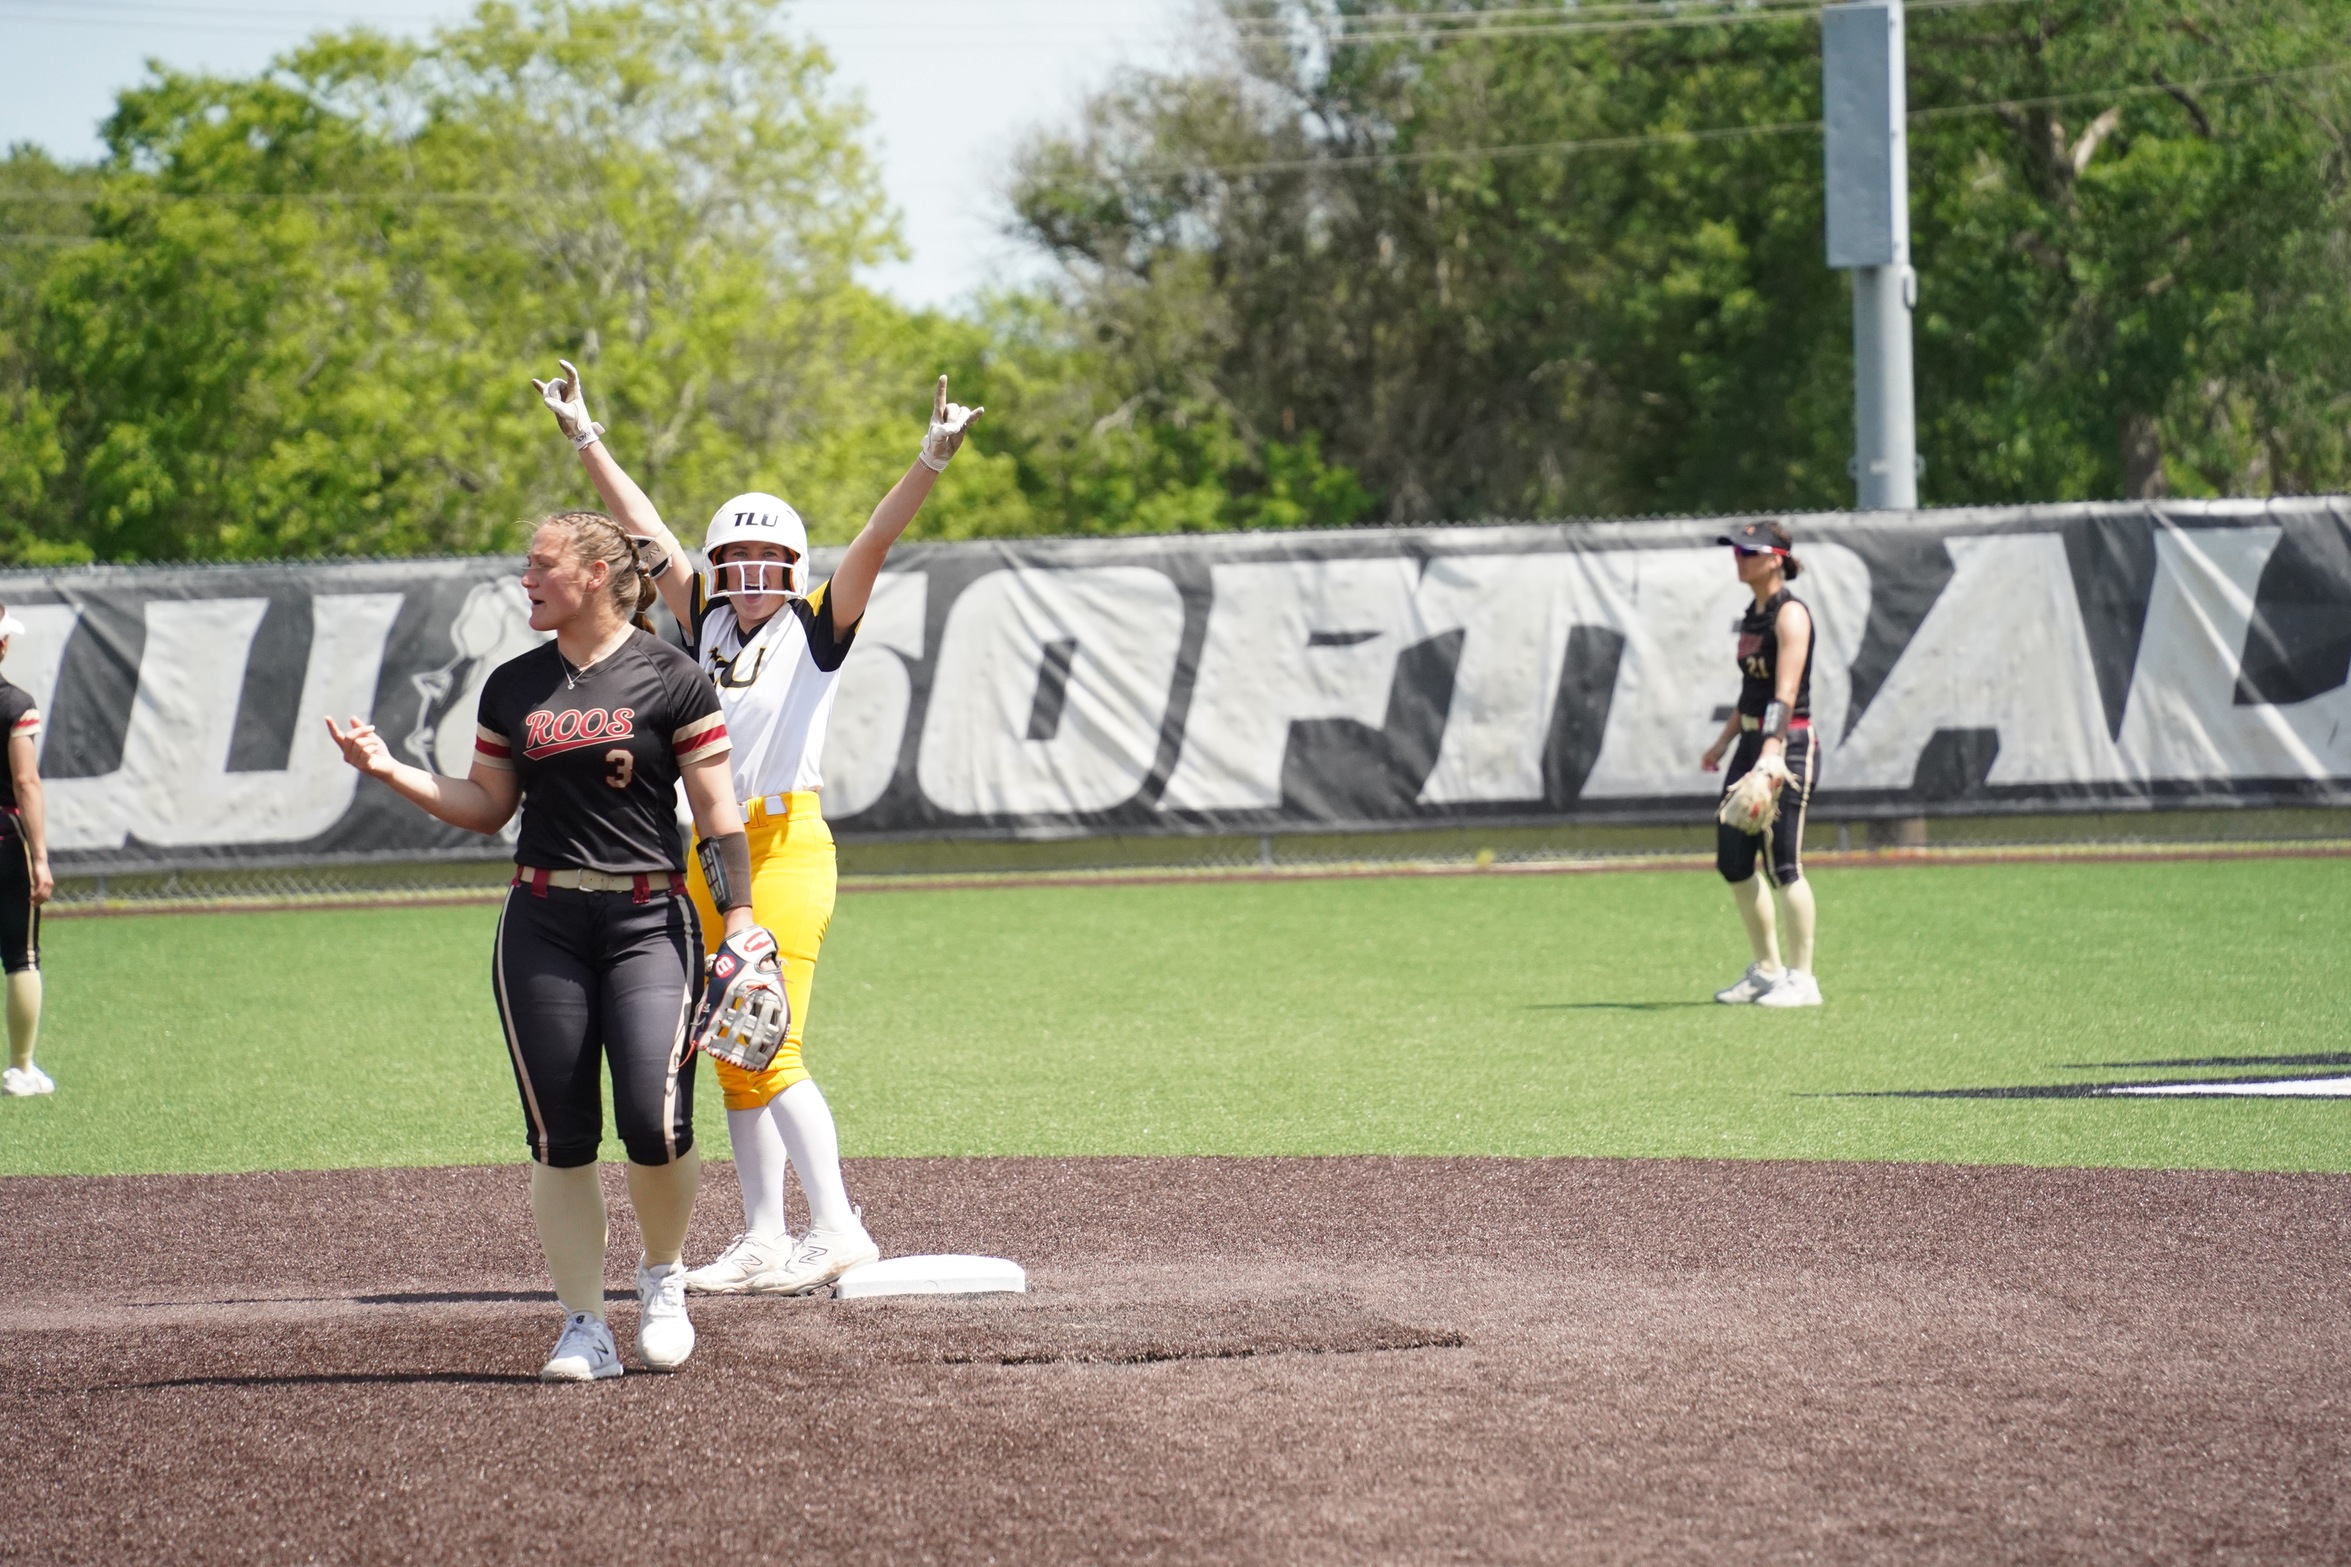 Caelee Clark celebrates at second base (photo by Bryce Hayes)